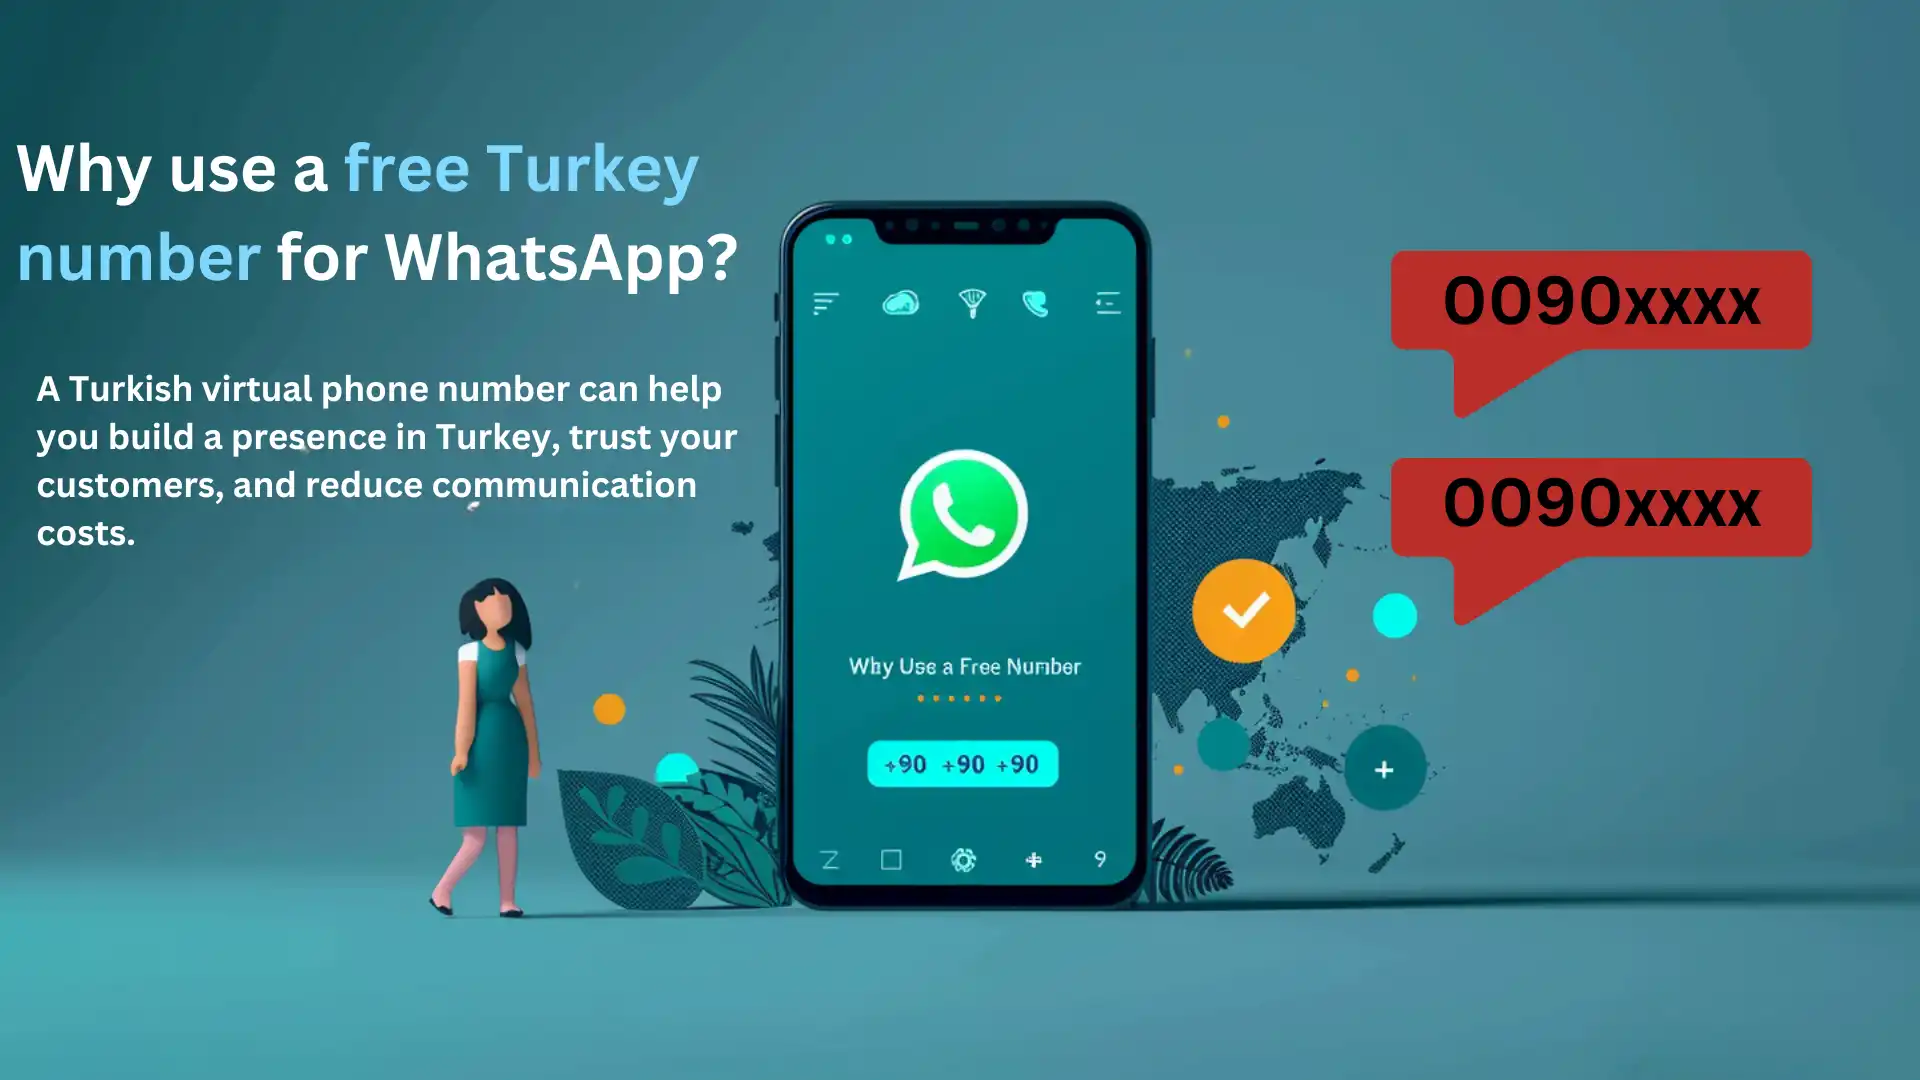 Why use a free Turkey number for WhatsApp?